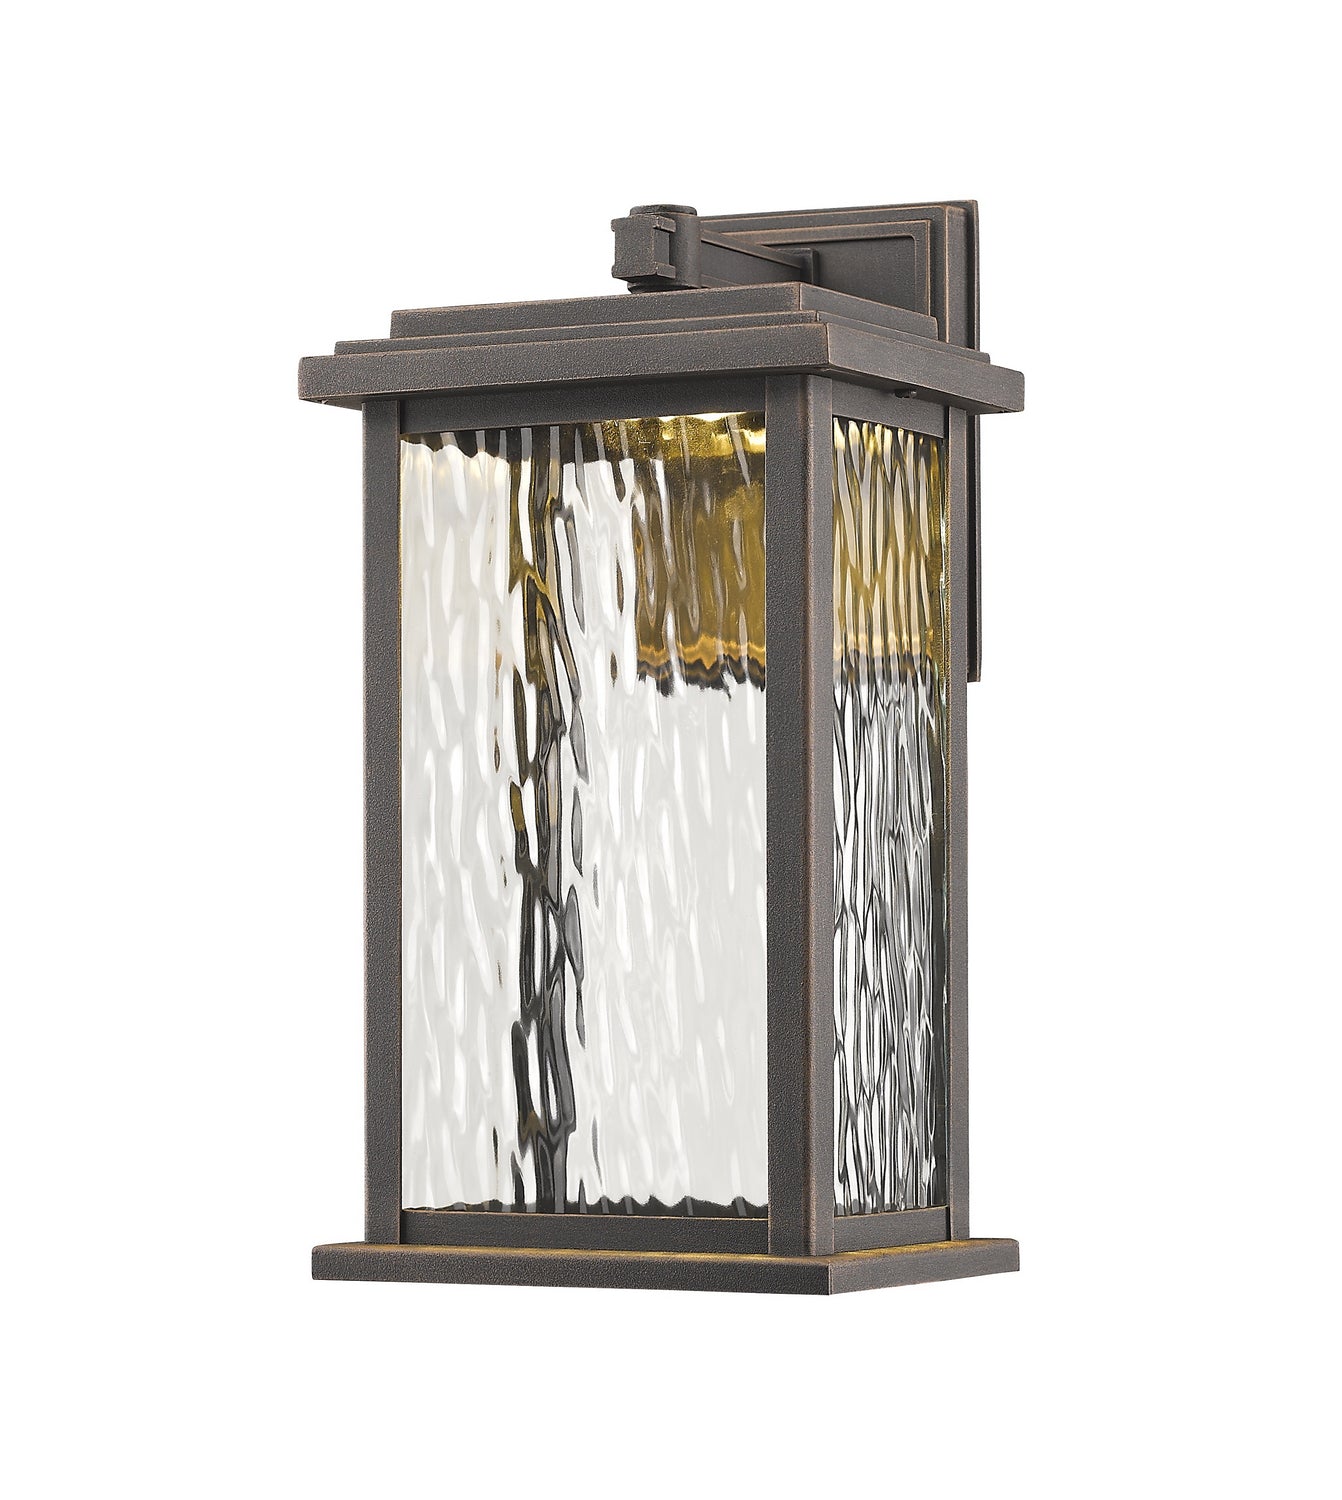 Artcraft Canada - LED Outdoor Post Mount - Sussex Drive - Oil Rubbed Bronze- Union Lighting Luminaires Decor